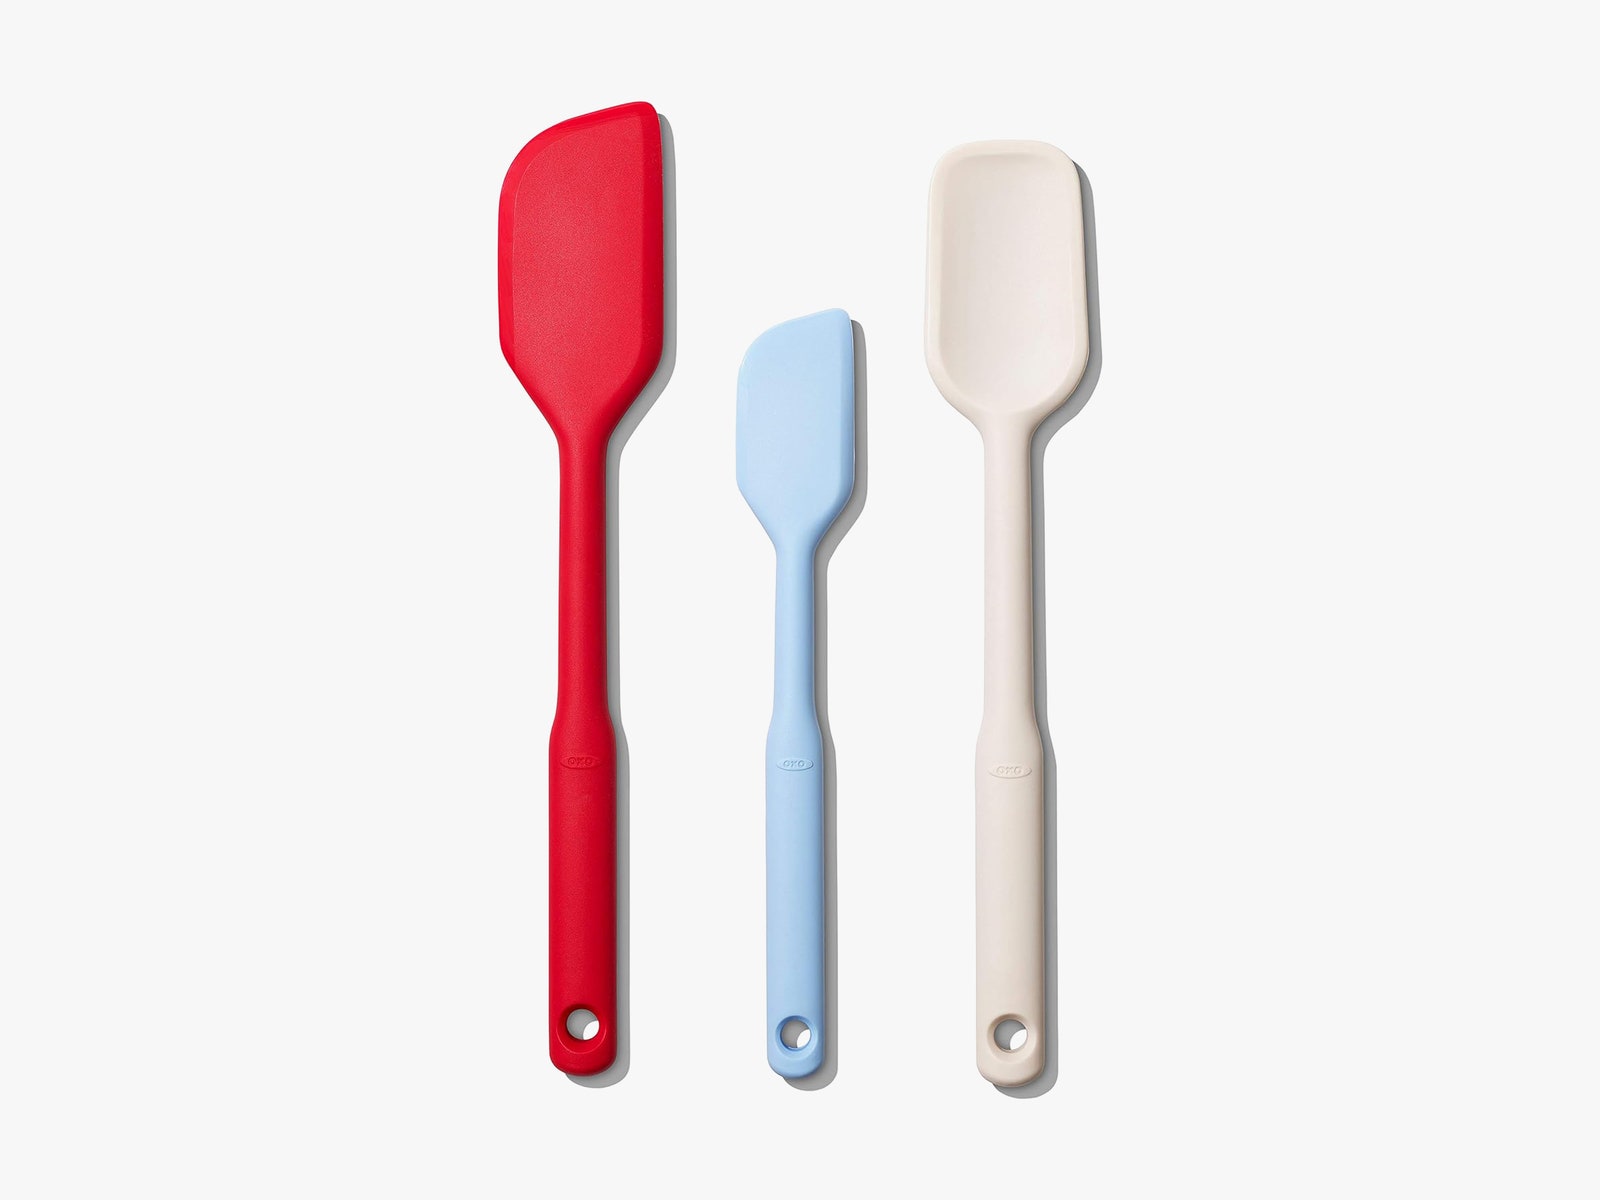 3 silicone spatulas side by side are red blue and white from left to right